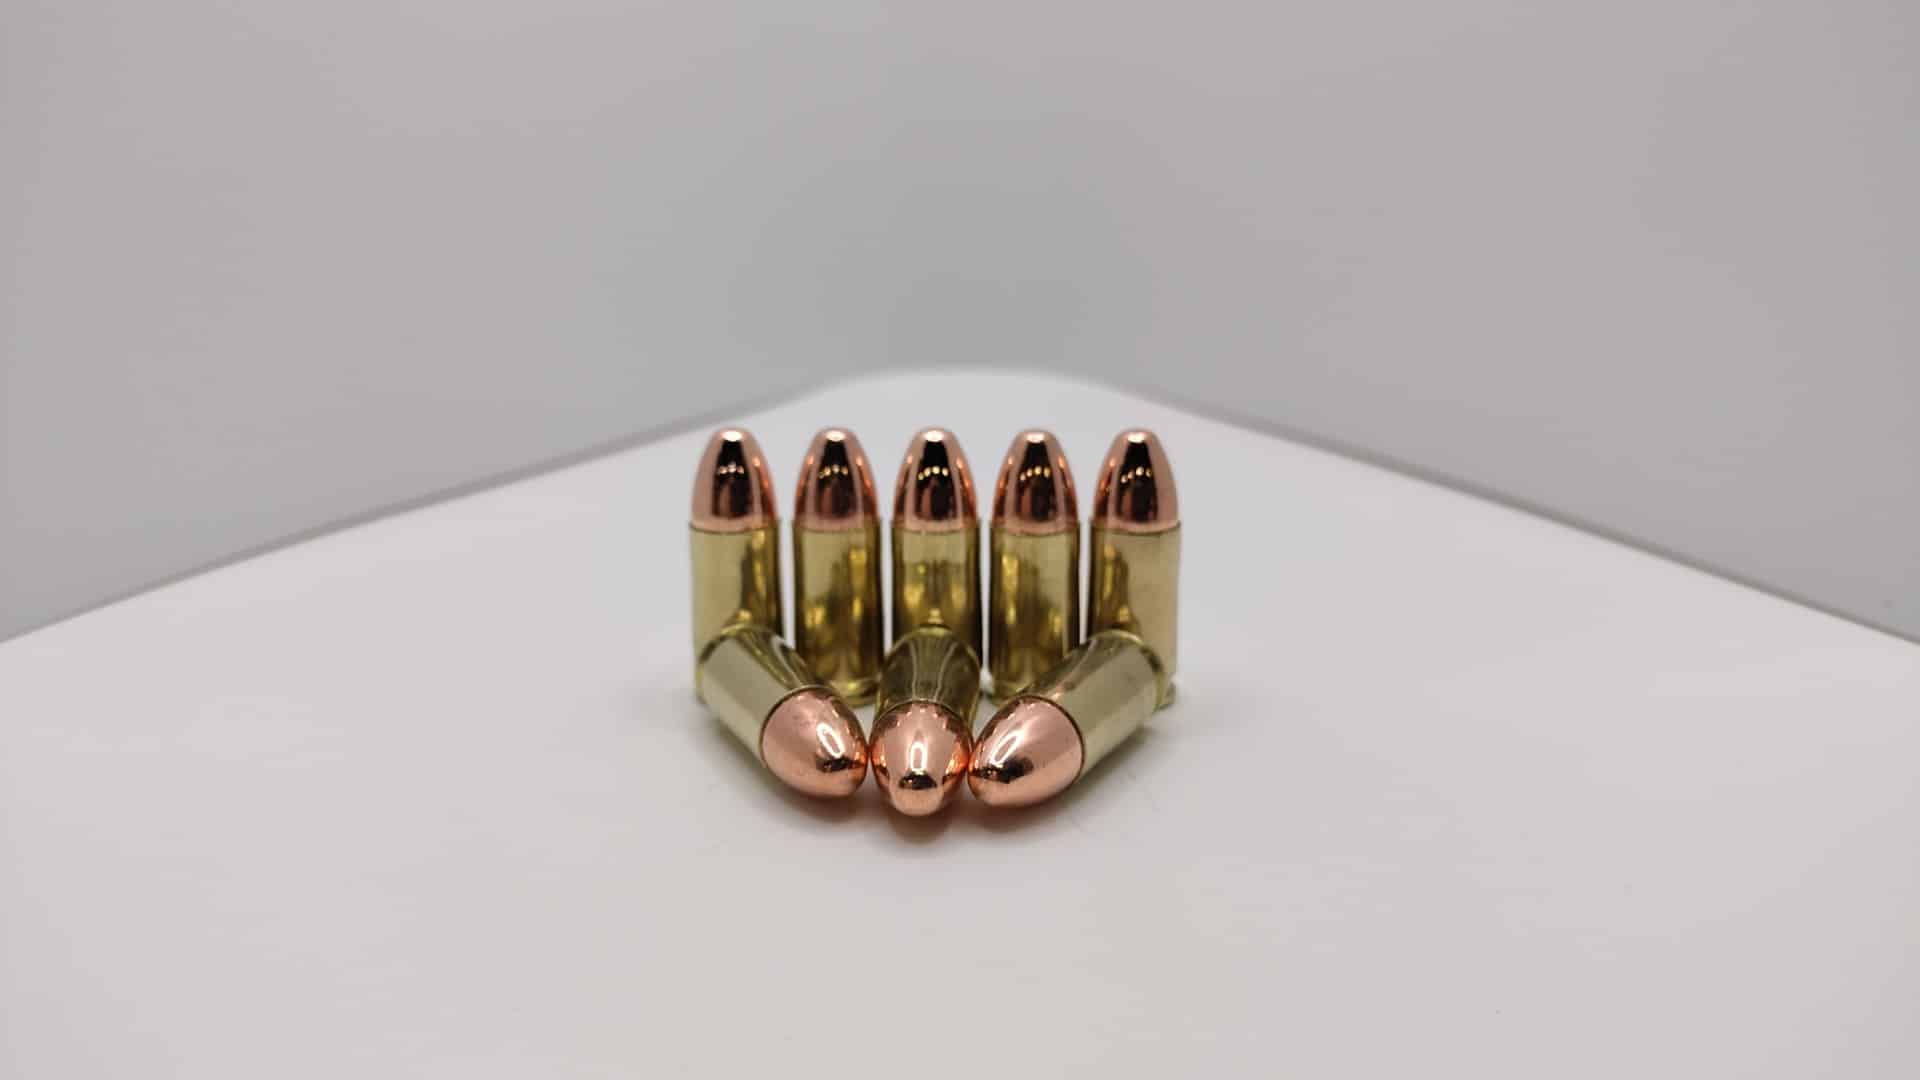 Bulk Everyday Deal Luger REMAN Bulk MADE IN THE USA Limited Quantities RN Ammo